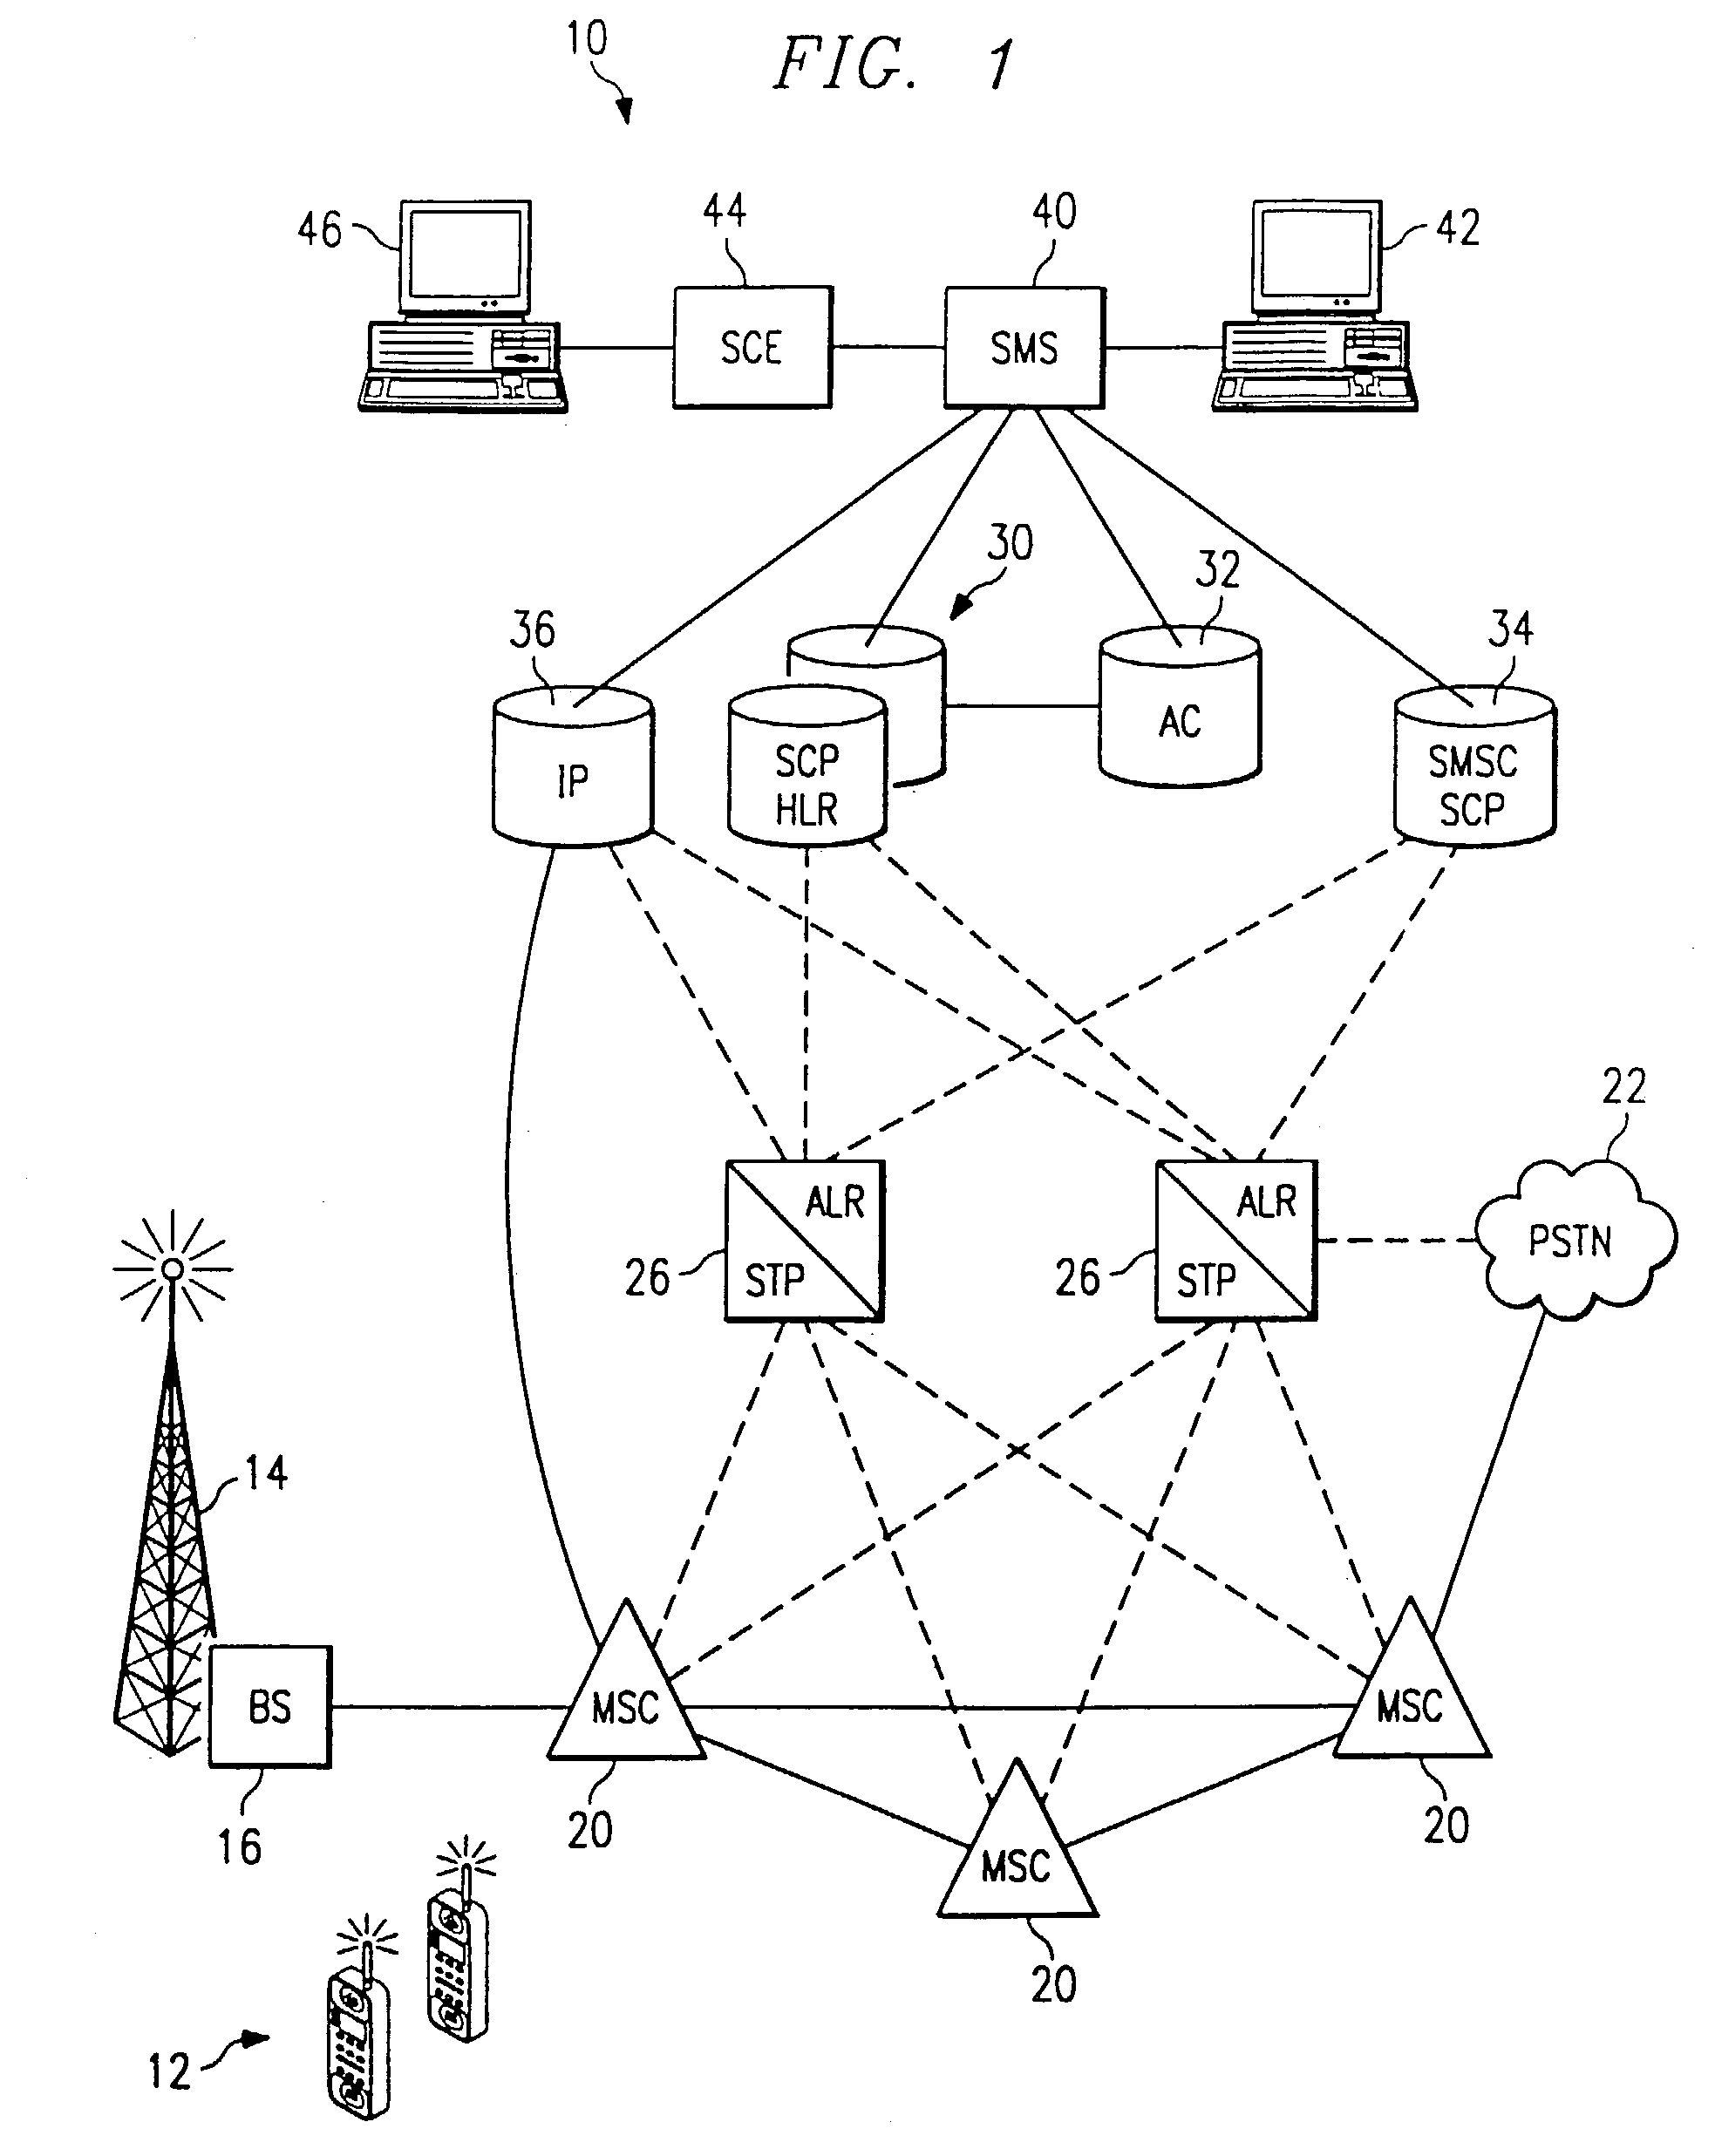 System and method for application location register routing in a telecommunications network